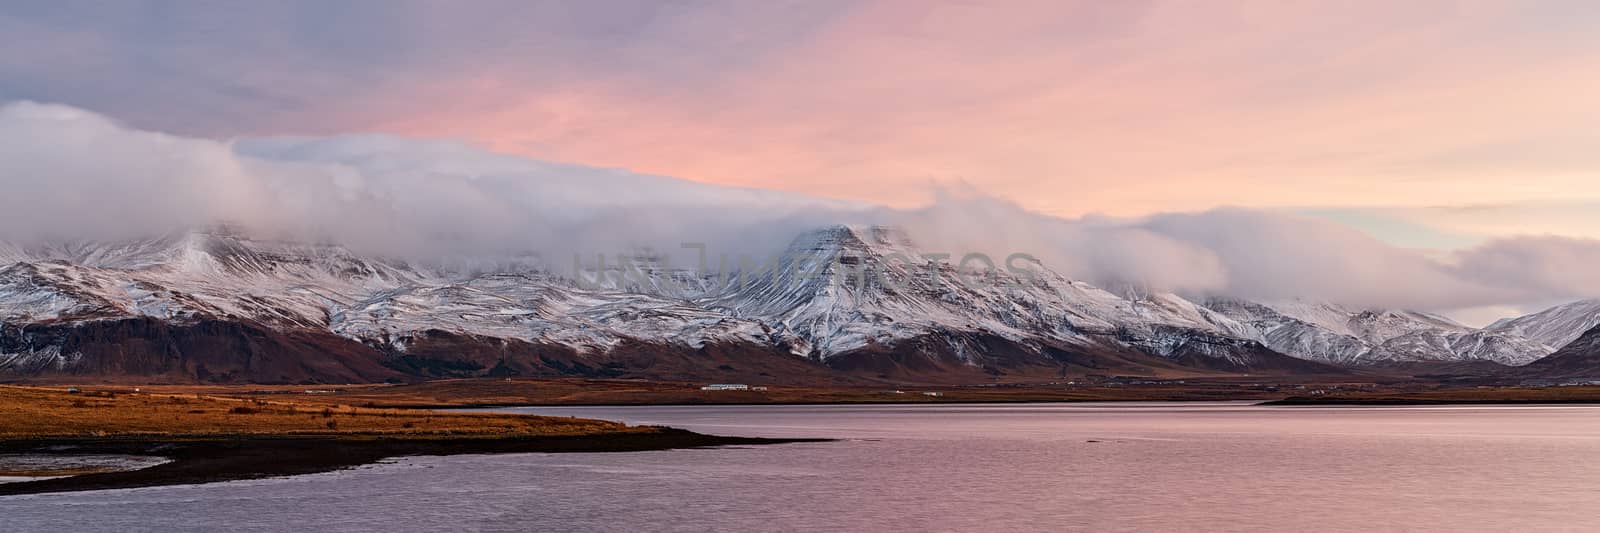 Sunrise in the mountains seen from Reykjavik, Iceland